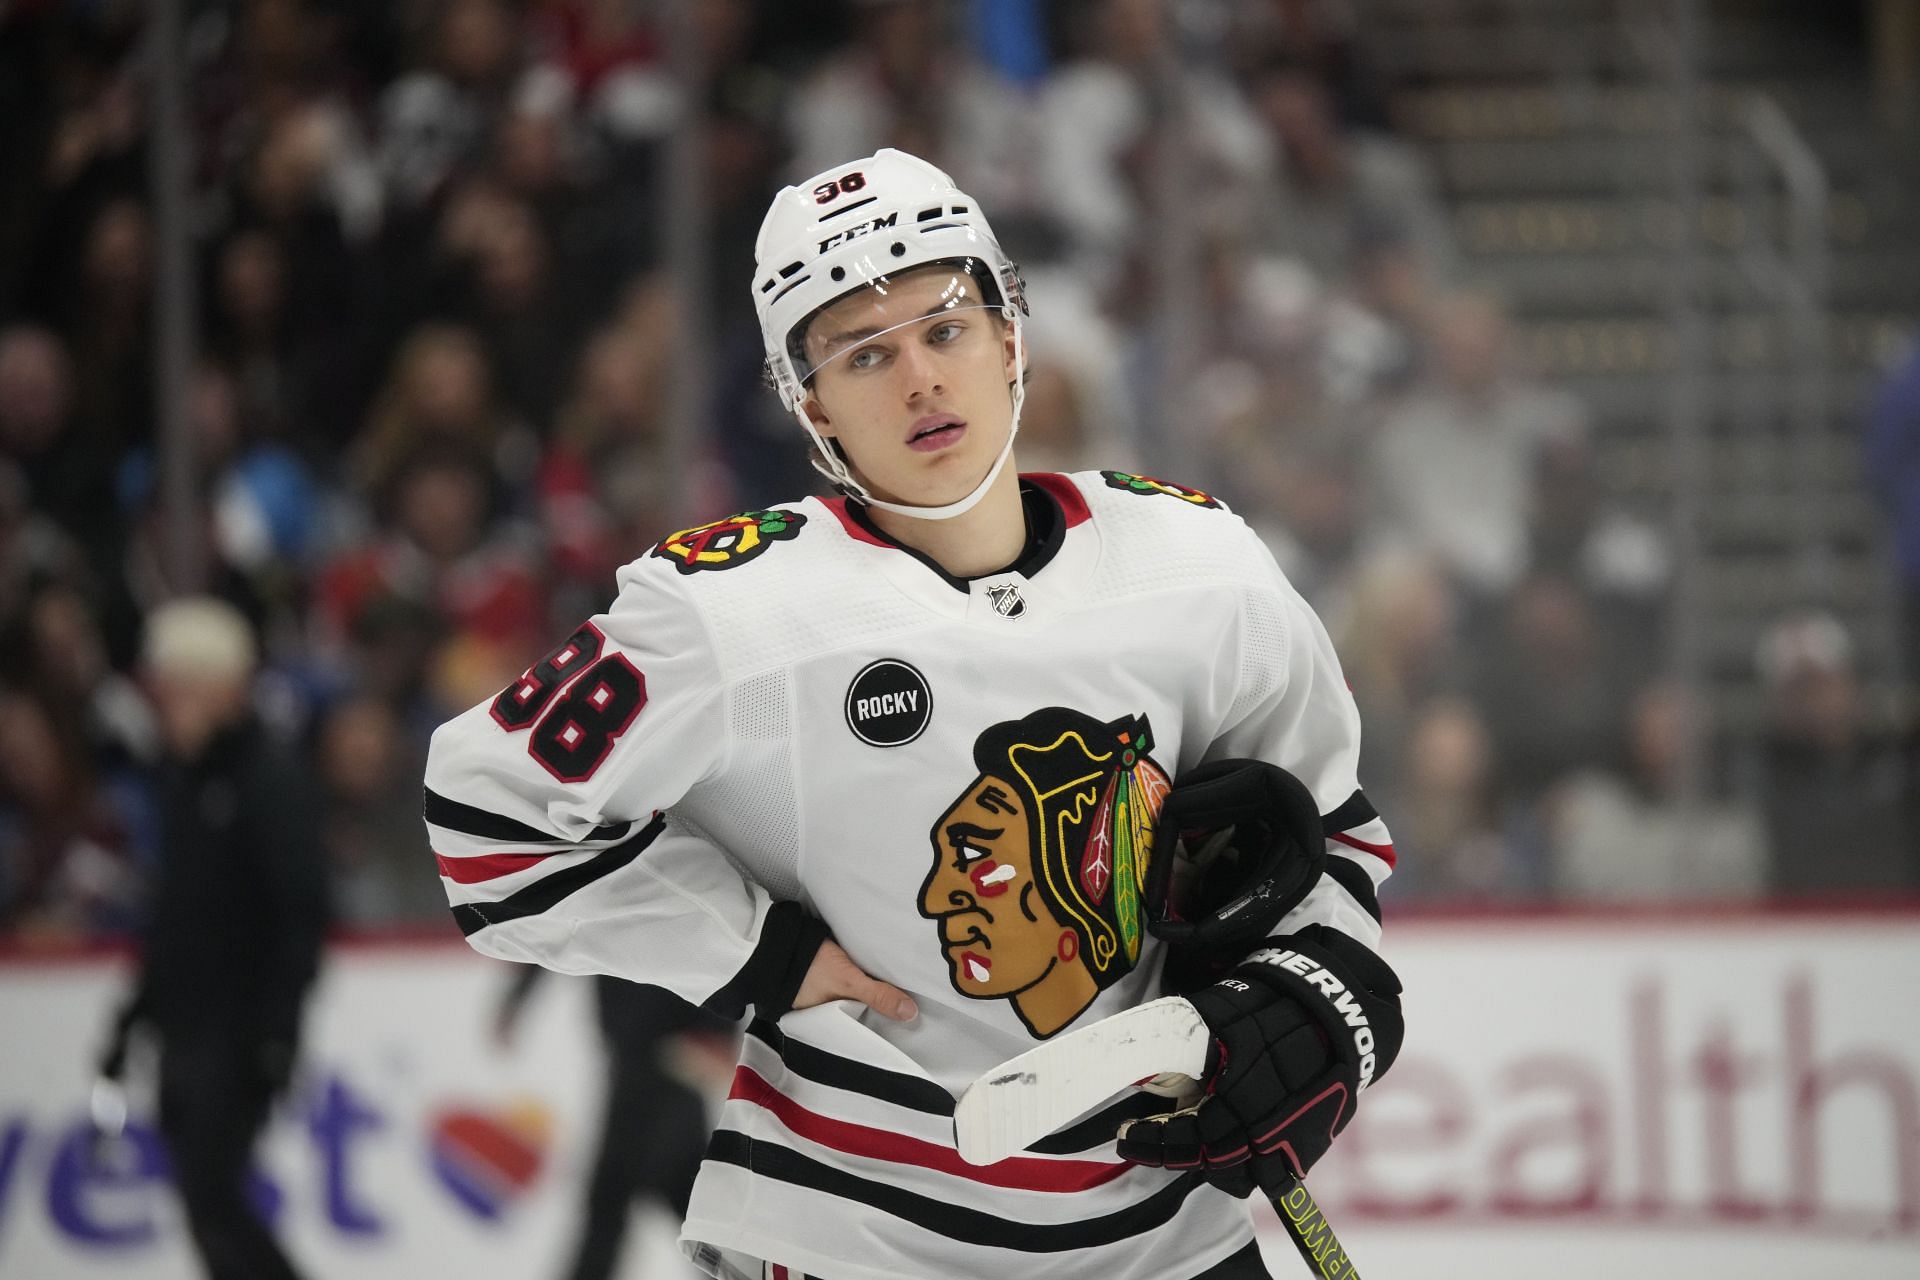 Top 10 Hottest Hockey players in the NHL 2023 - Handsome NHL Players